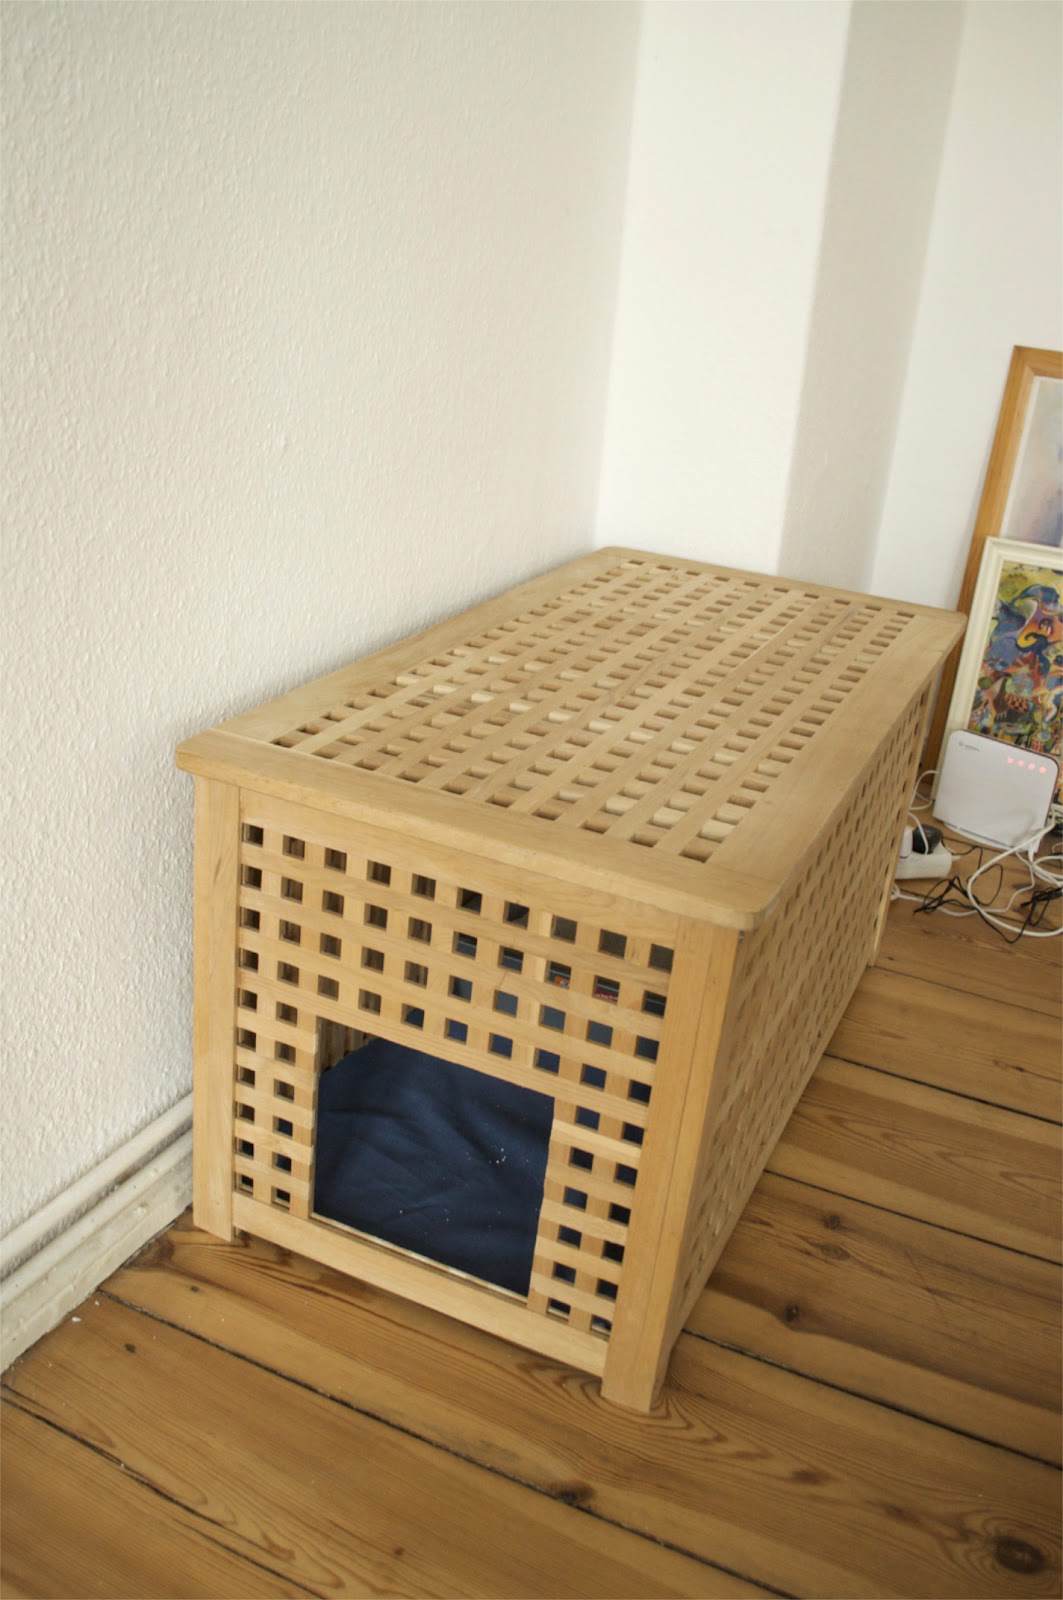 A long IKEA Hol table with a pet bed inside   let your pet sleep inside to feel safe and hidden